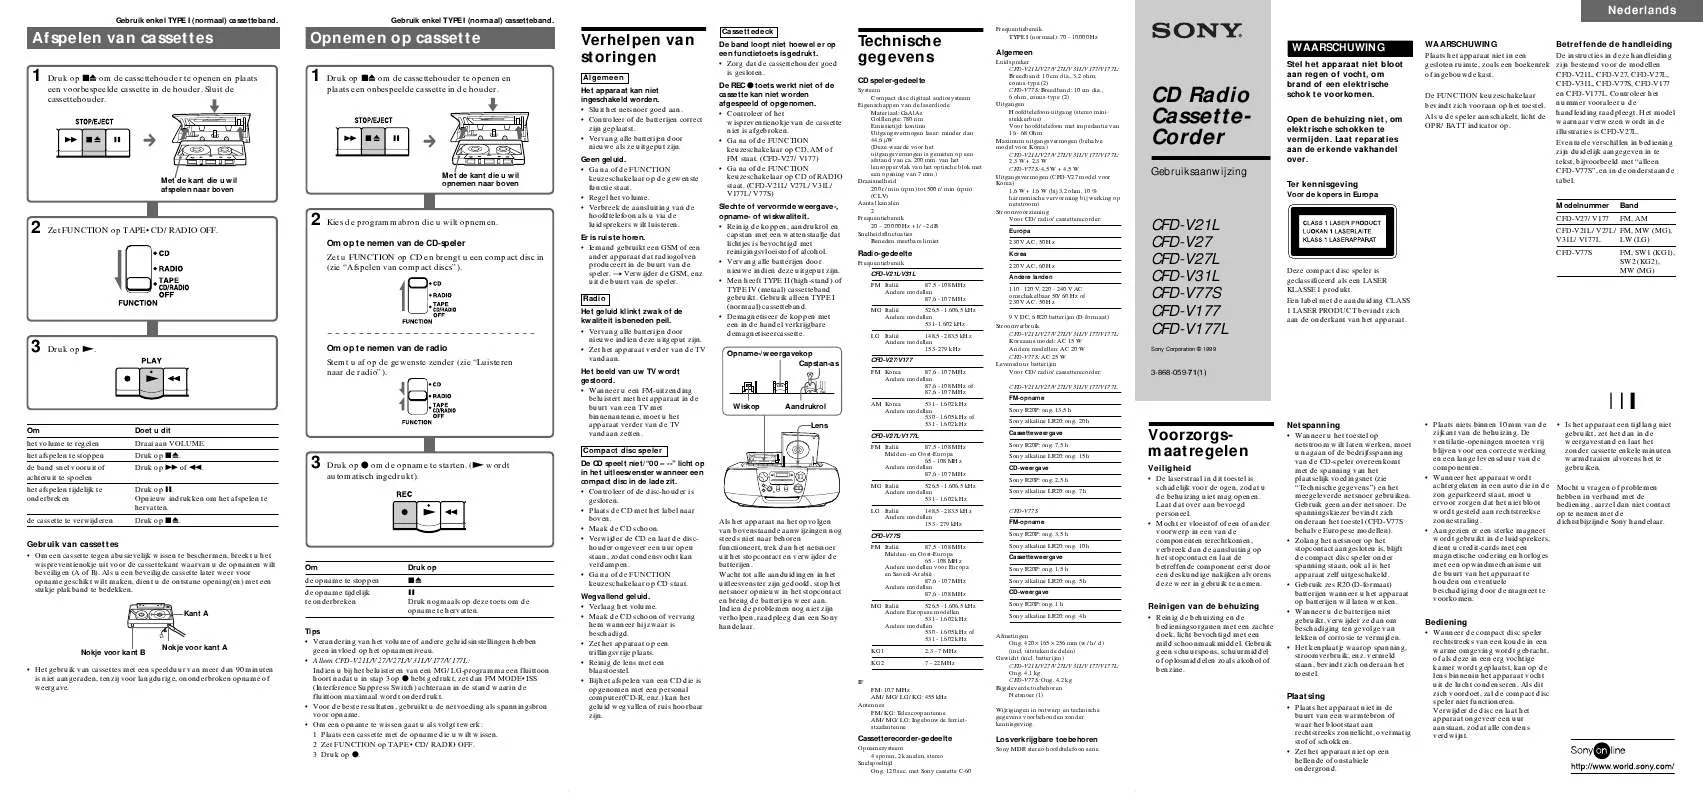 Mode d'emploi SONY CFD-V27L